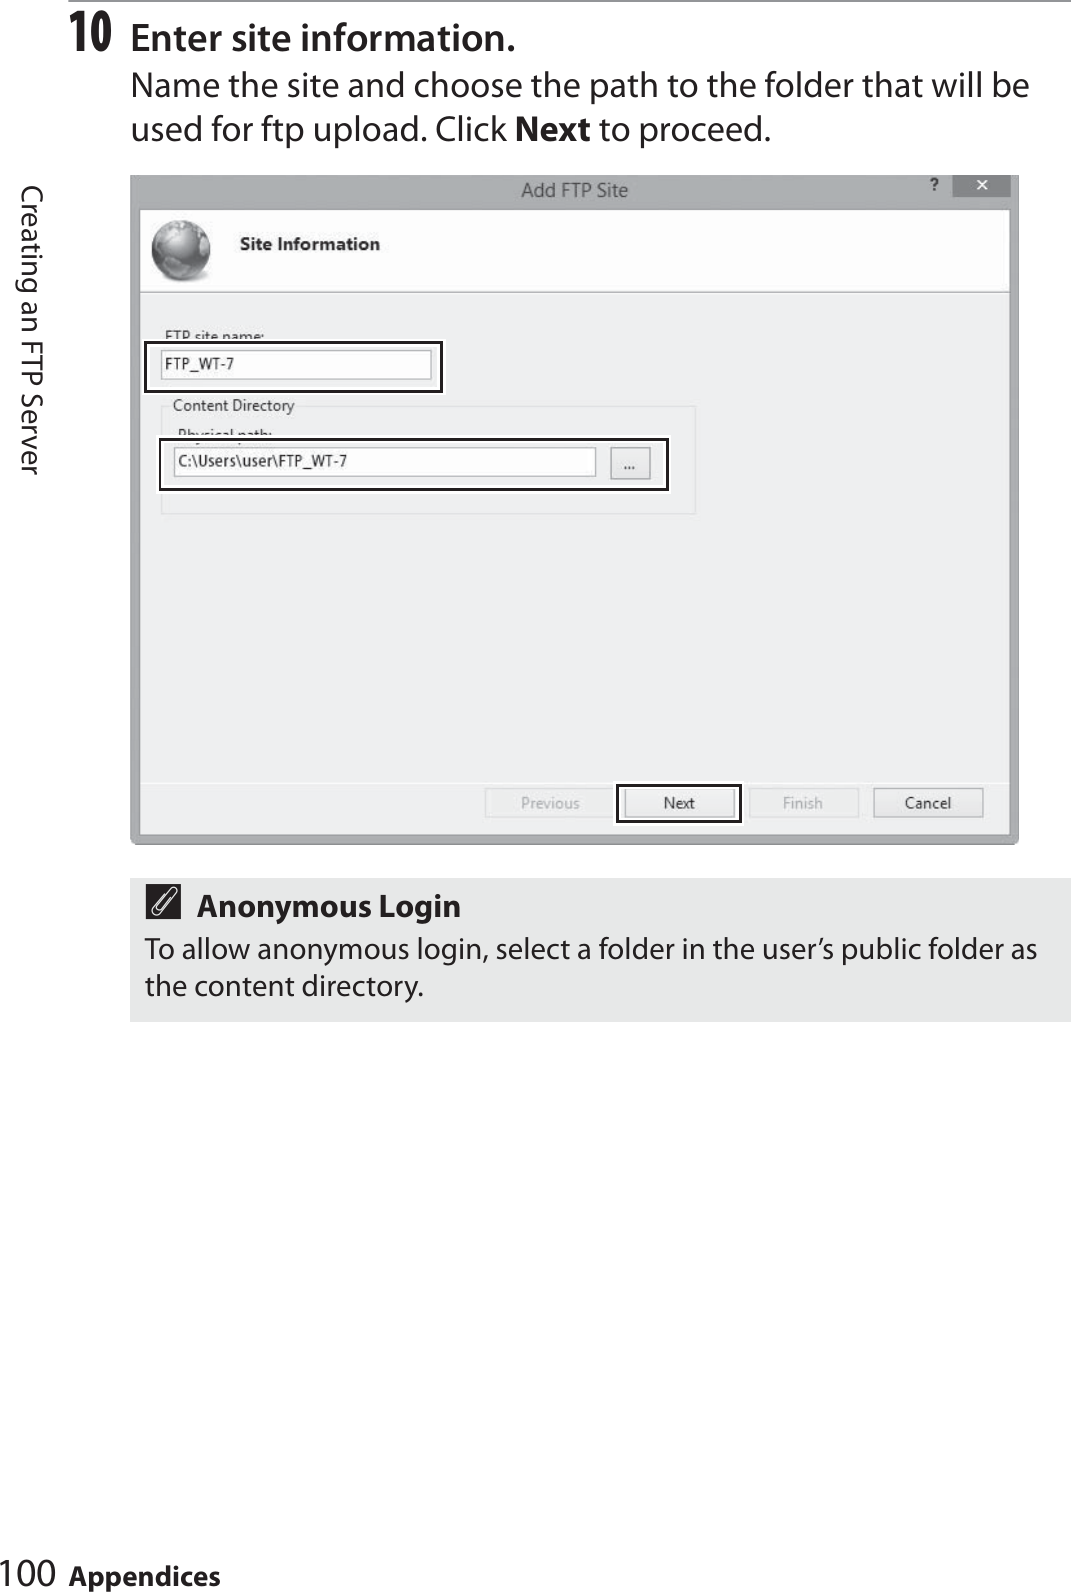 100 AppendicesCreating an FTP Server10Enter site information.Name the site and choose the path to the folder that will be used for ftp upload. Click Next to proceed.AAnonymous LoginTo allow anonymous login, select a folder in the user’s public folder as the content directory.